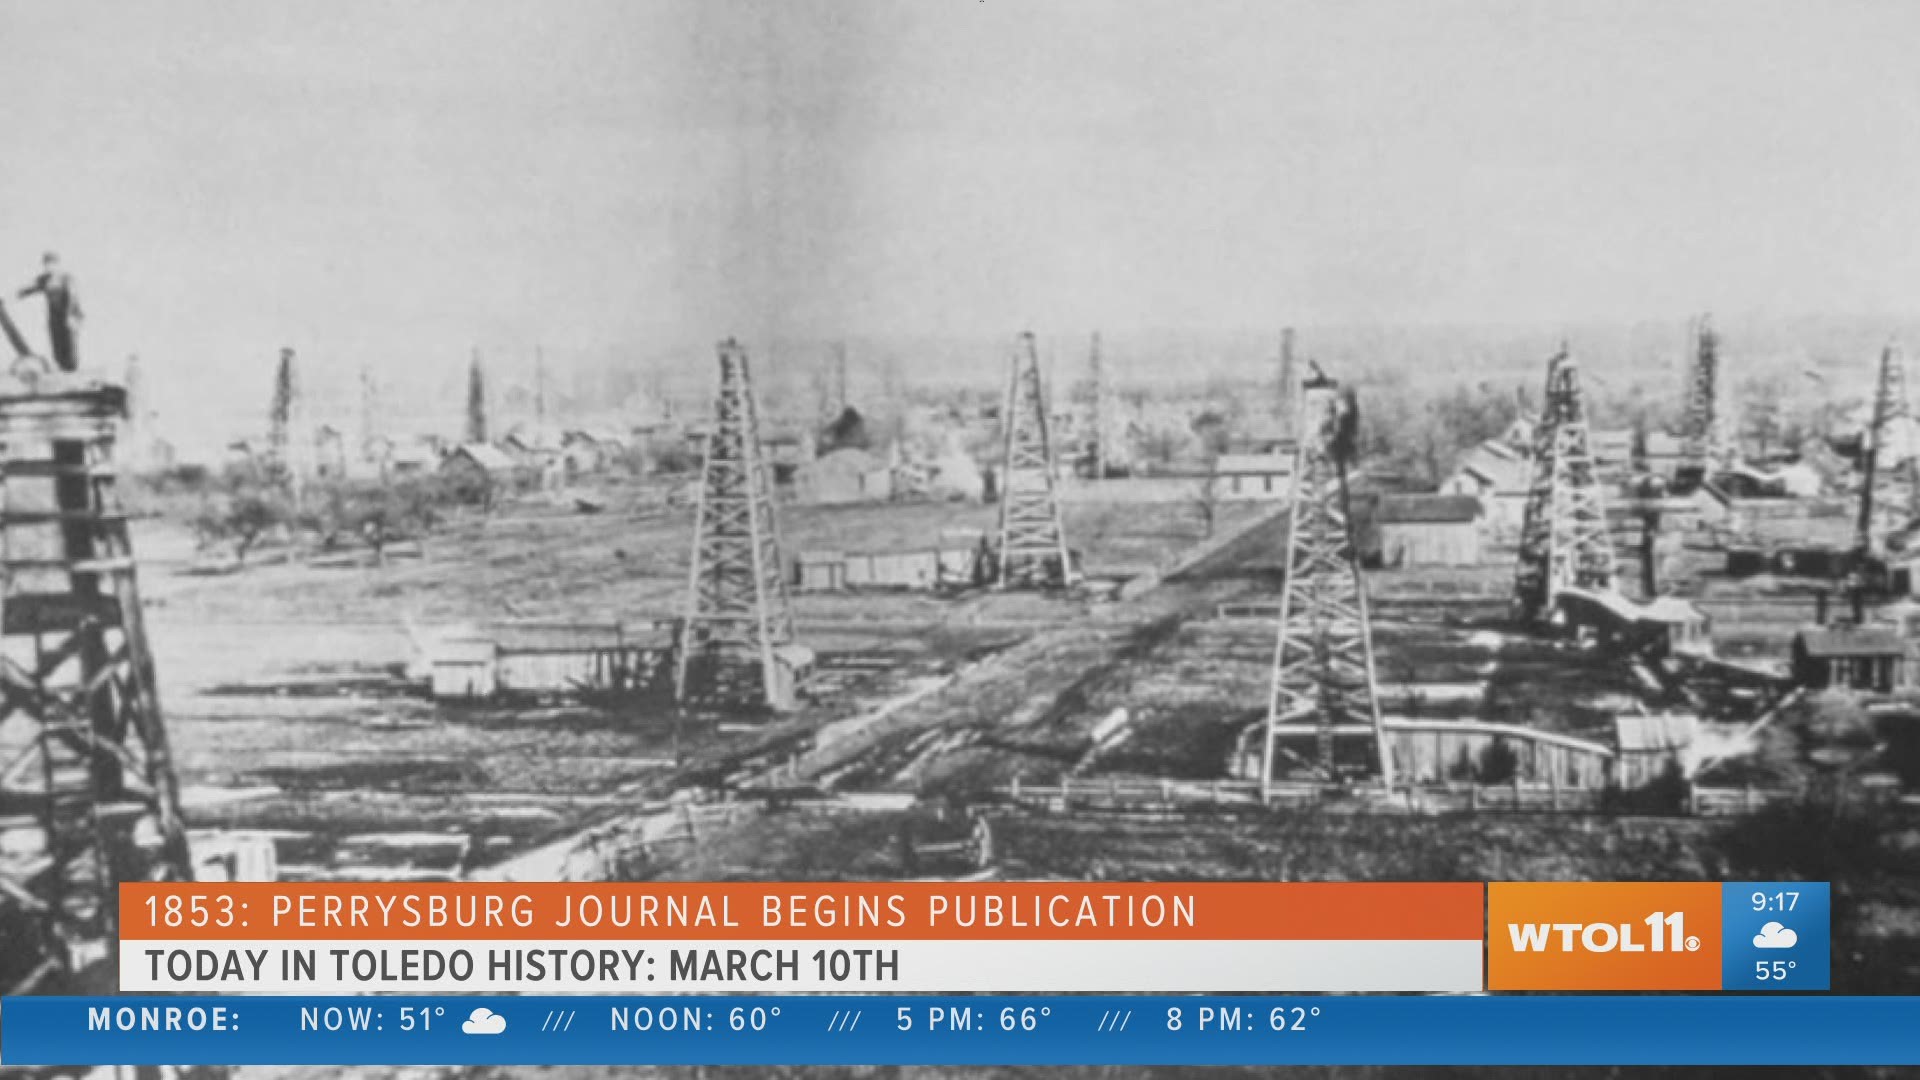 From the start of the Perrysburg Journal to major fires, here's a look at what happened on this day in Toledo history.